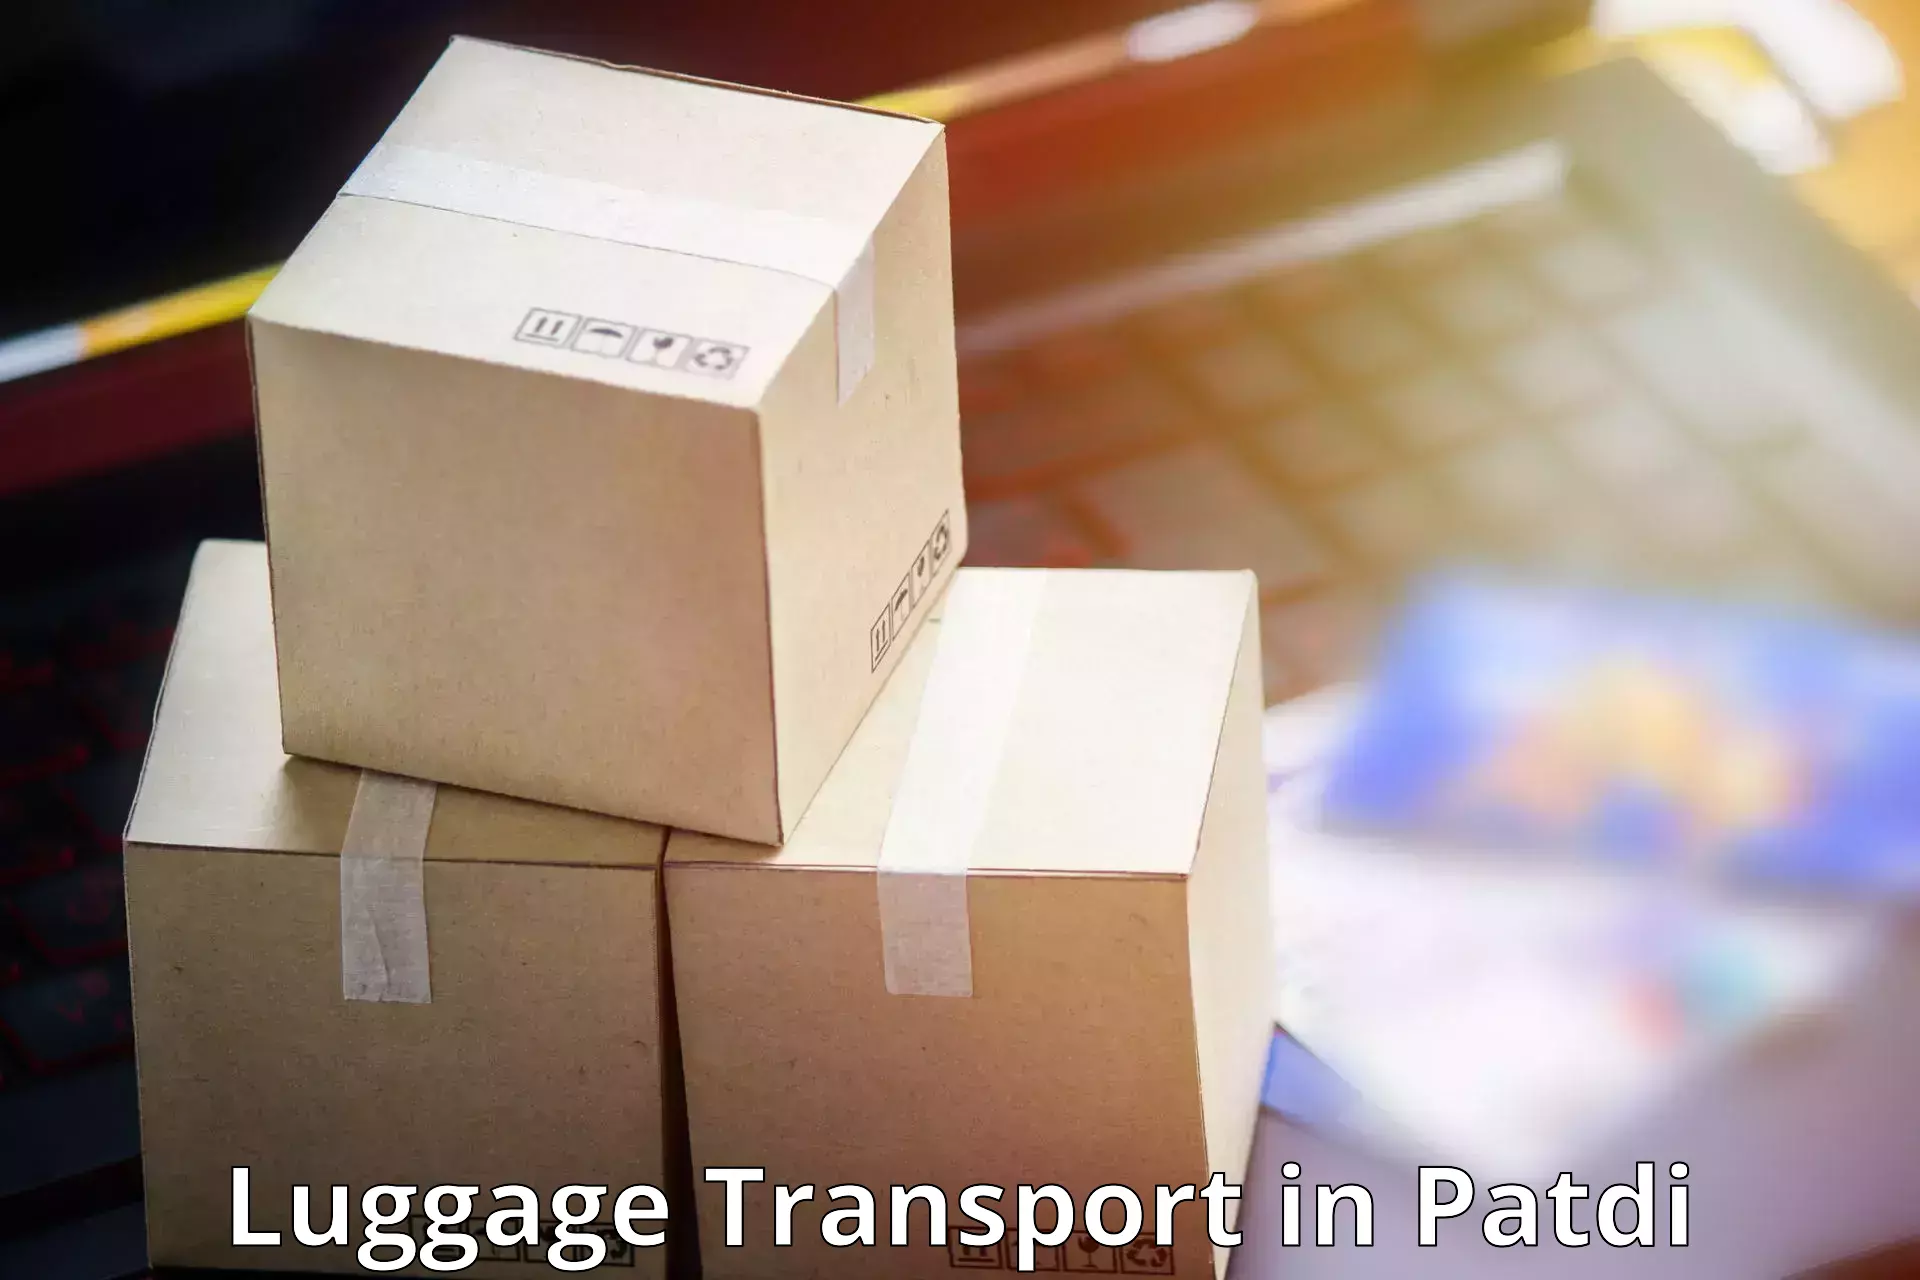 Baggage transport quote in Patdi